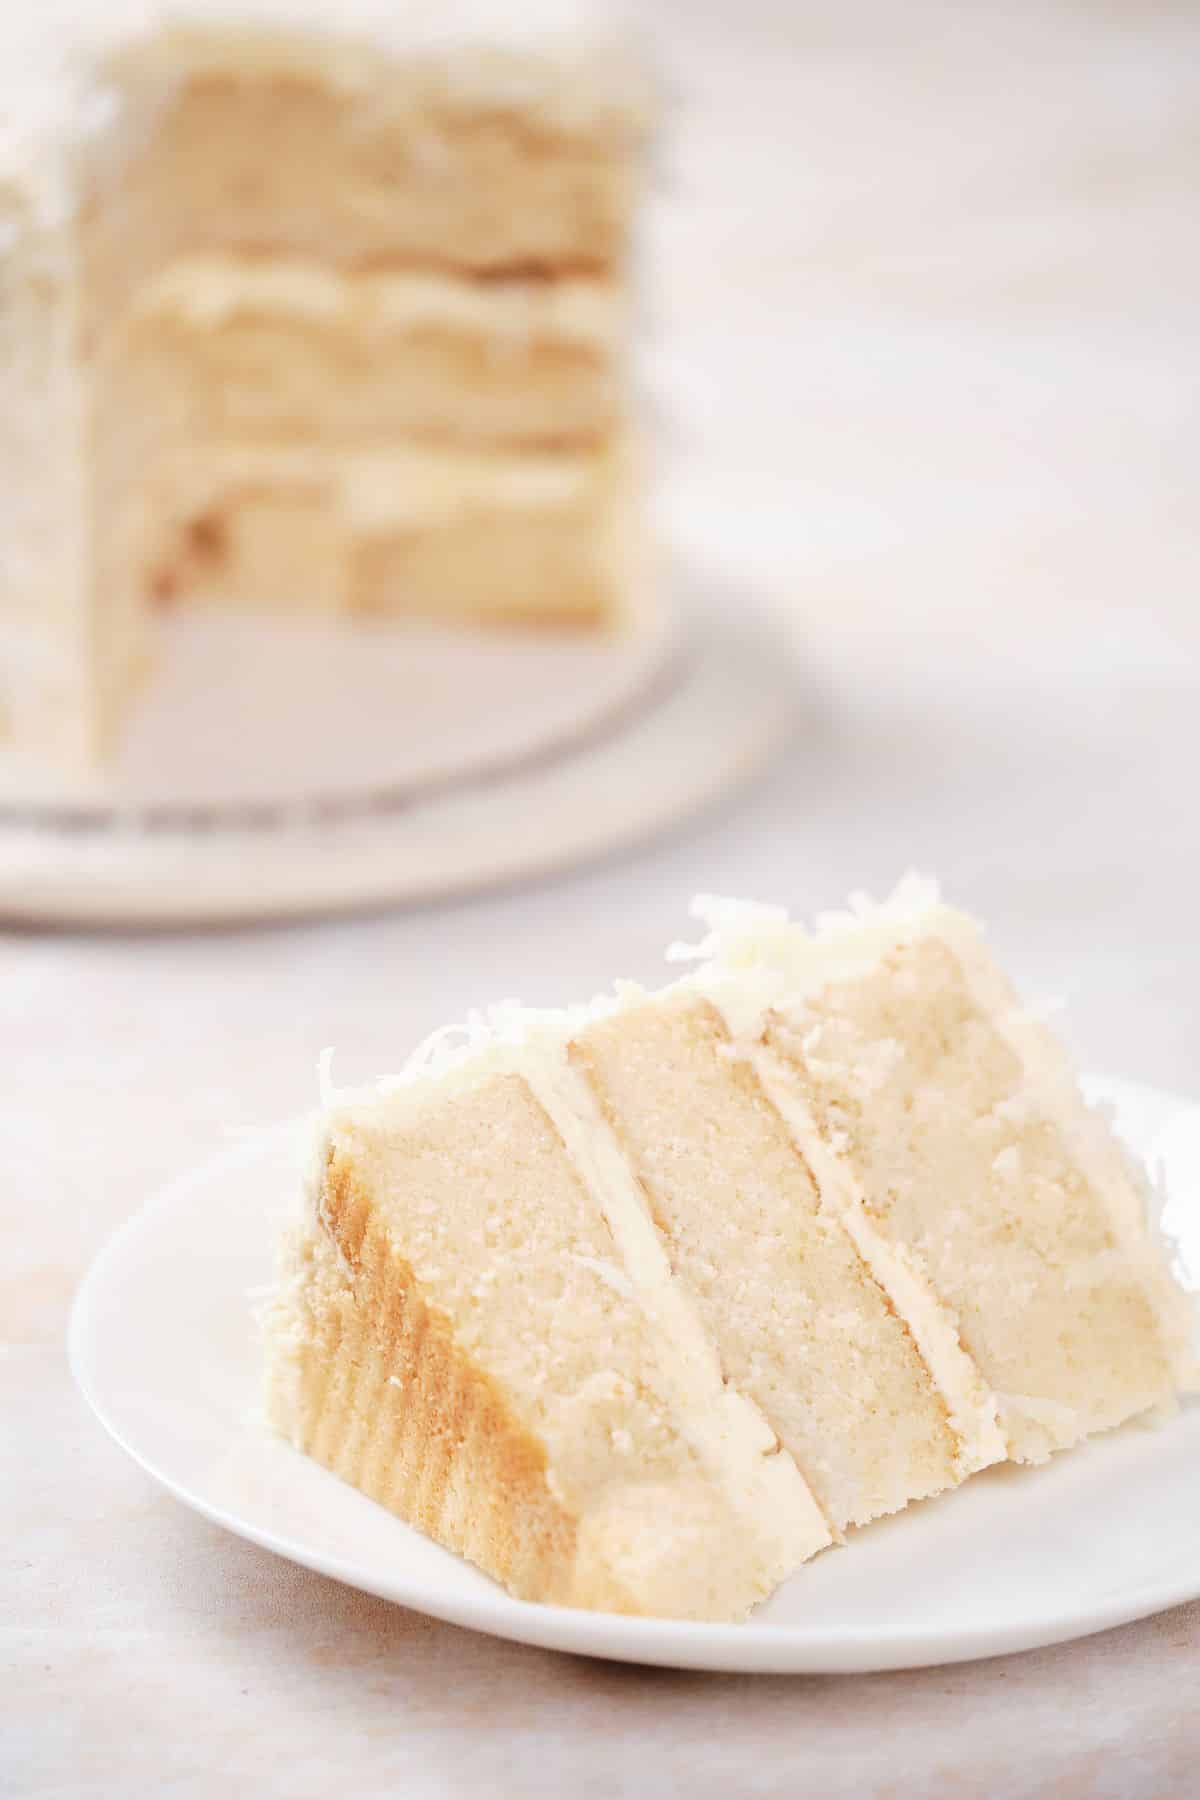 A moist slice of coconut cake on a plate.